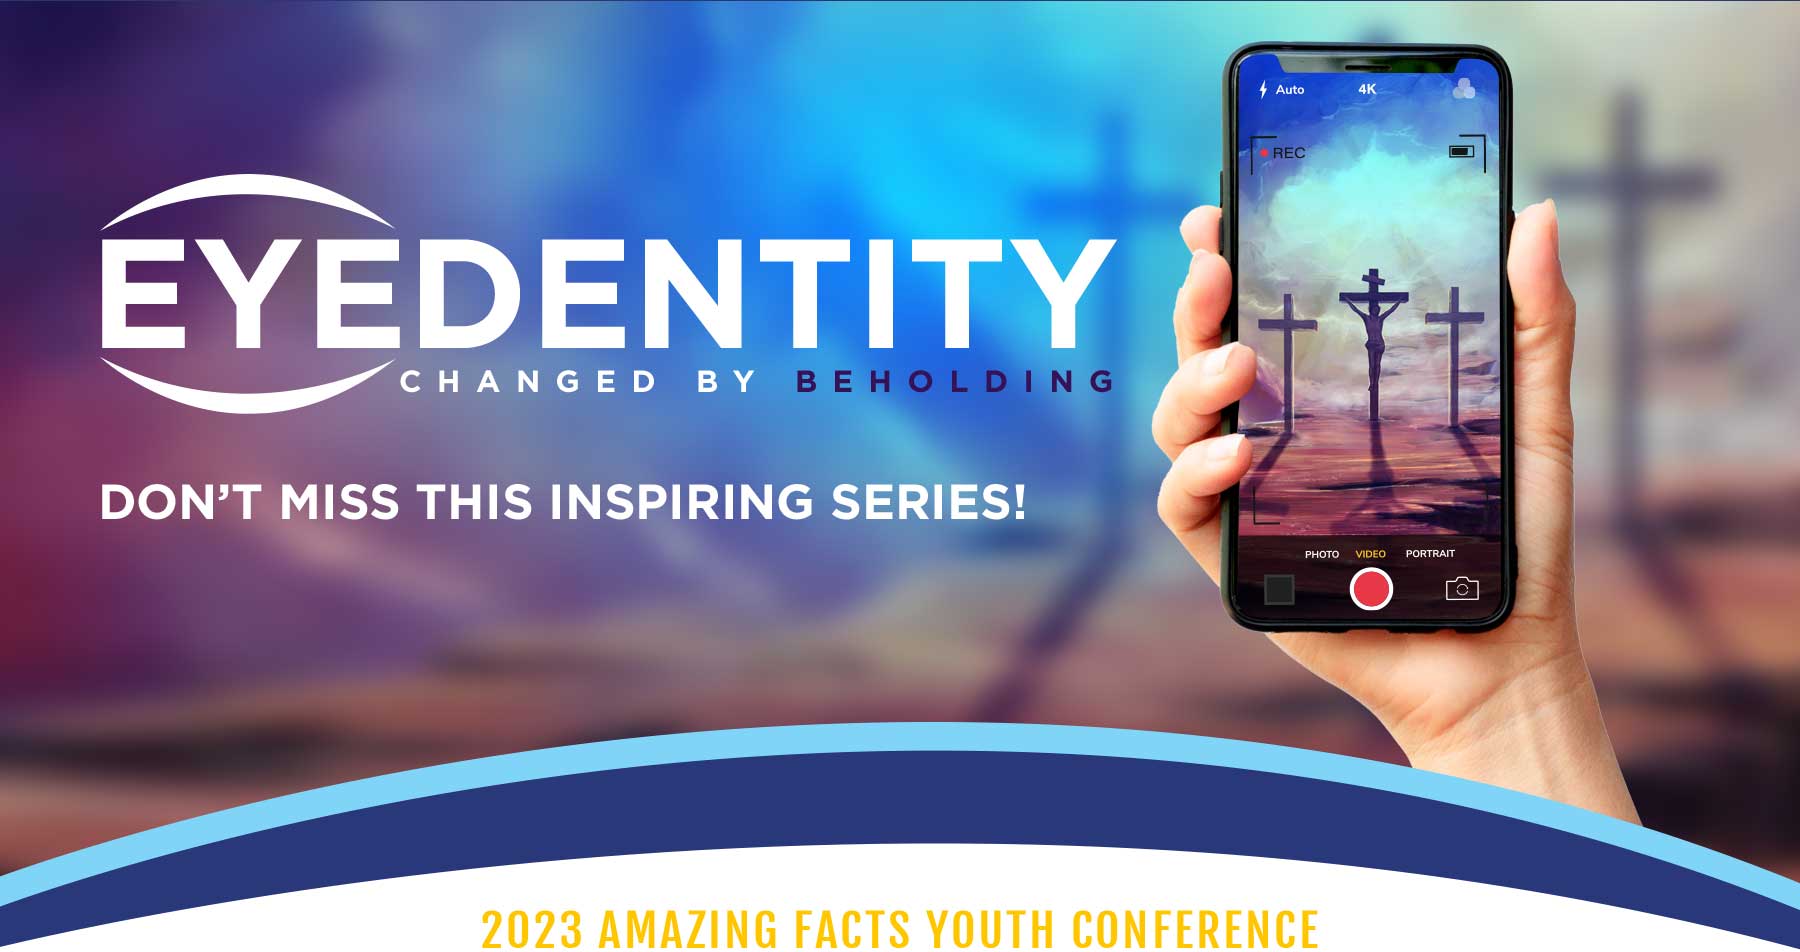 EYEdentity - 2023 Amazing Facts Youth Conference